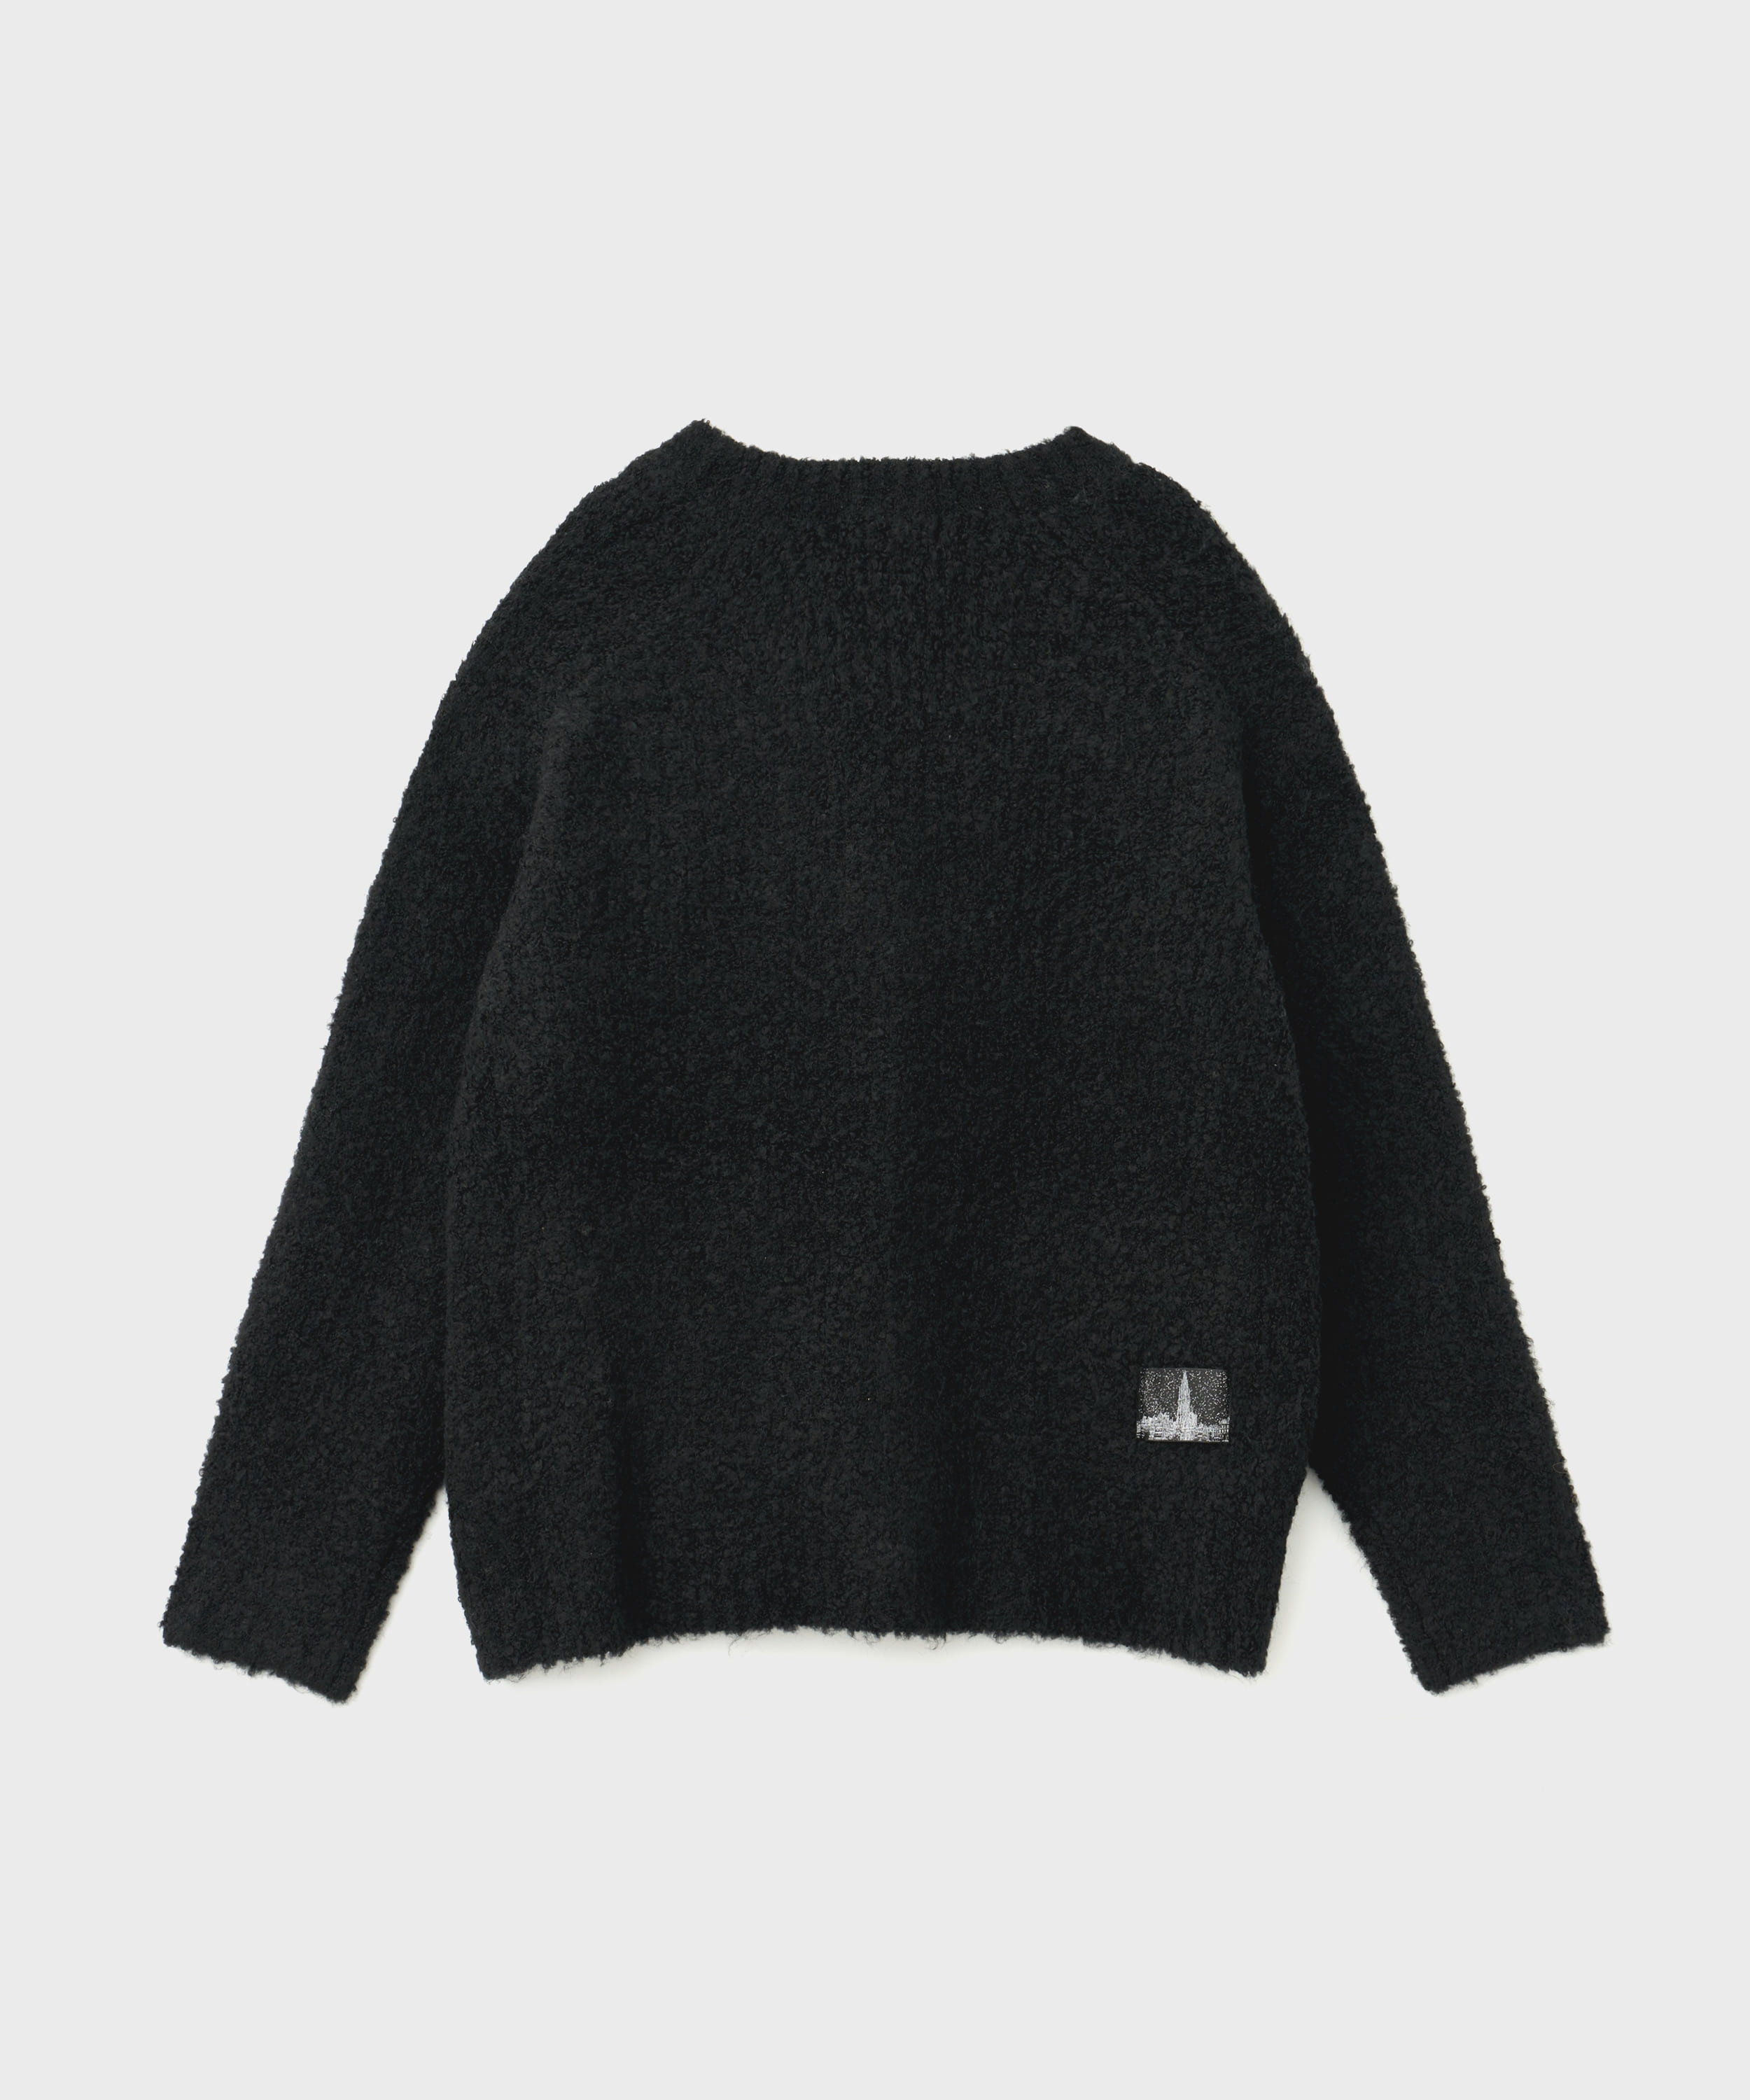 Inflated Cardigan (Black)